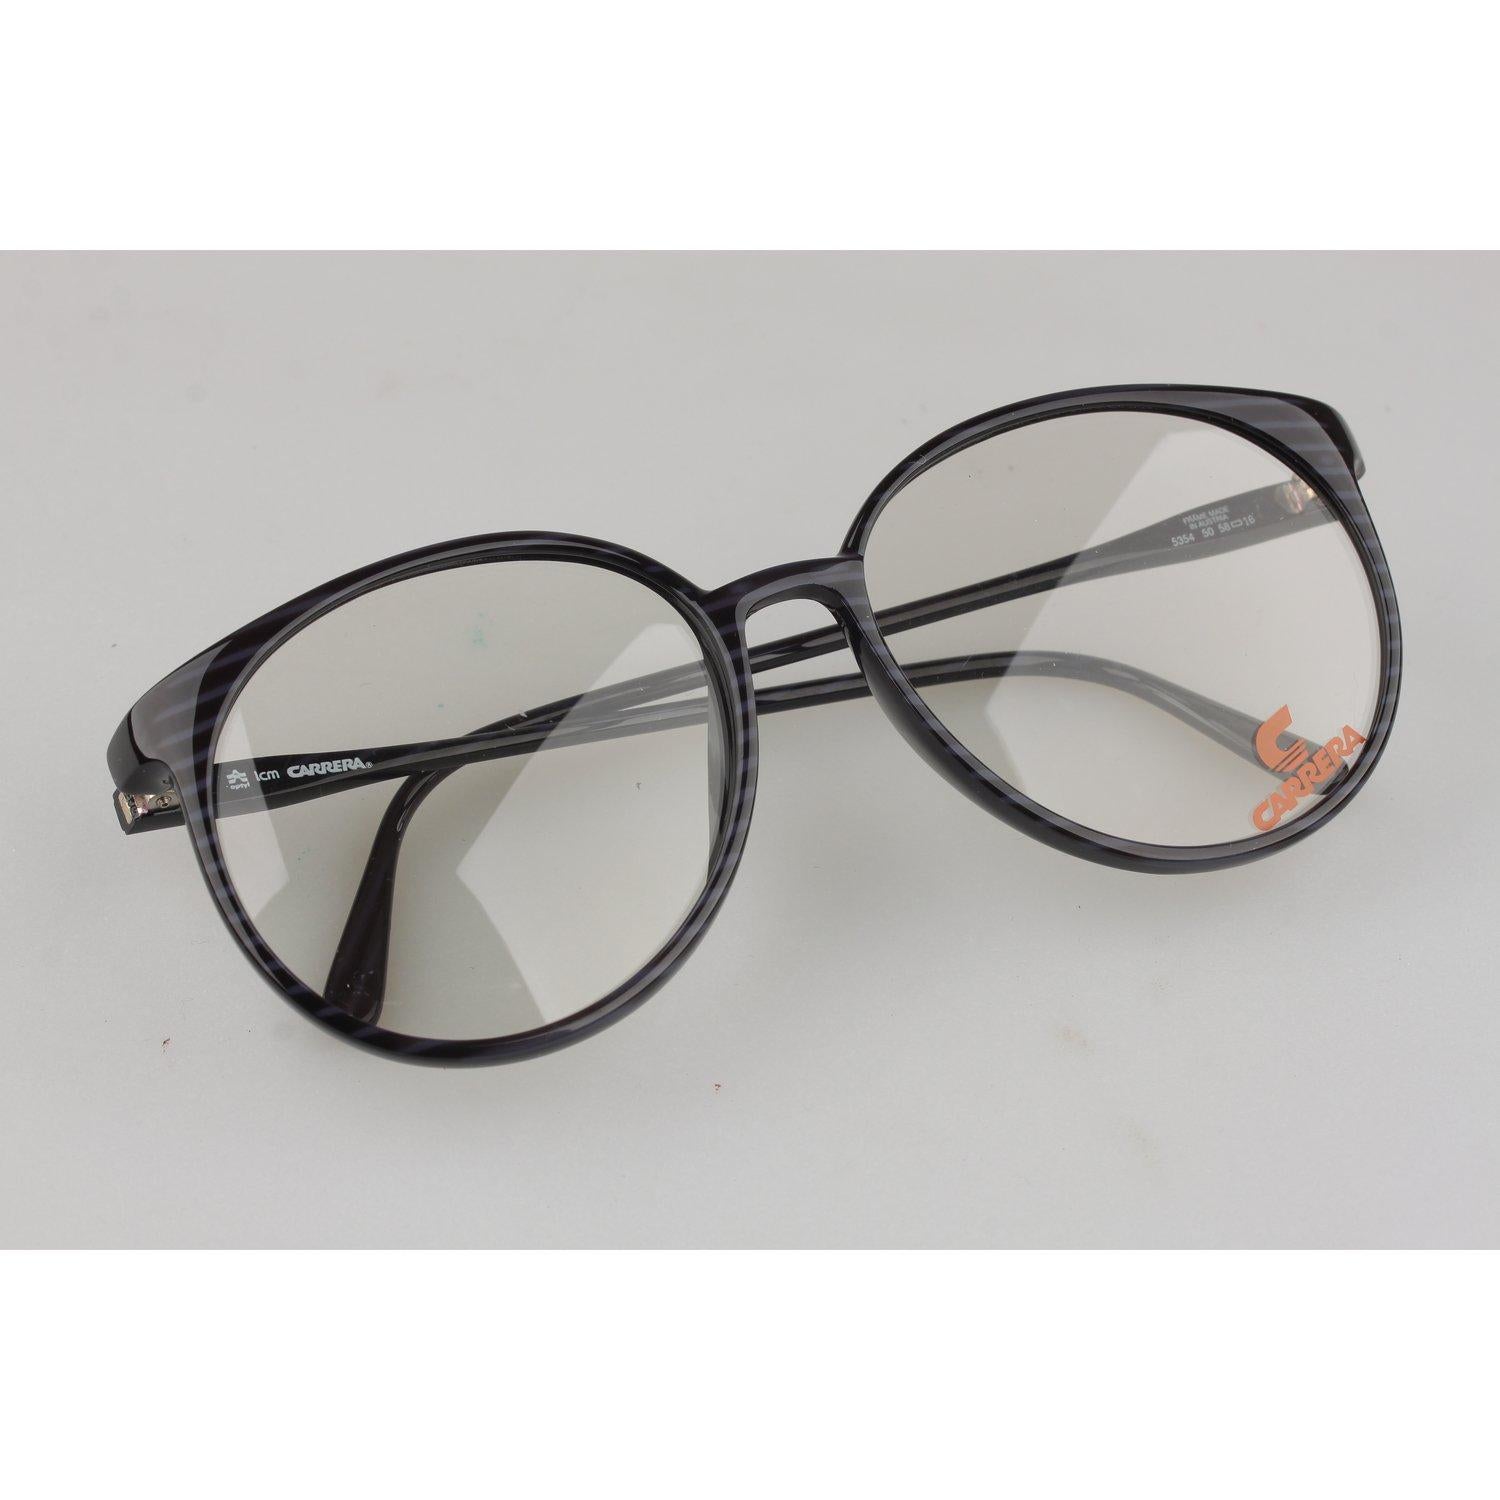 MATERIAL: Acetate COLOR: Black MODEL: 5354 GENDER: Adult Unisex SIZE: Medium COUNTRY OF MANUFACTURE: Austria Condition CONDITION DETAILS: New Old Stock - Never Worn or Used - With NO lenses. They will come with a Generic Case. Measurements